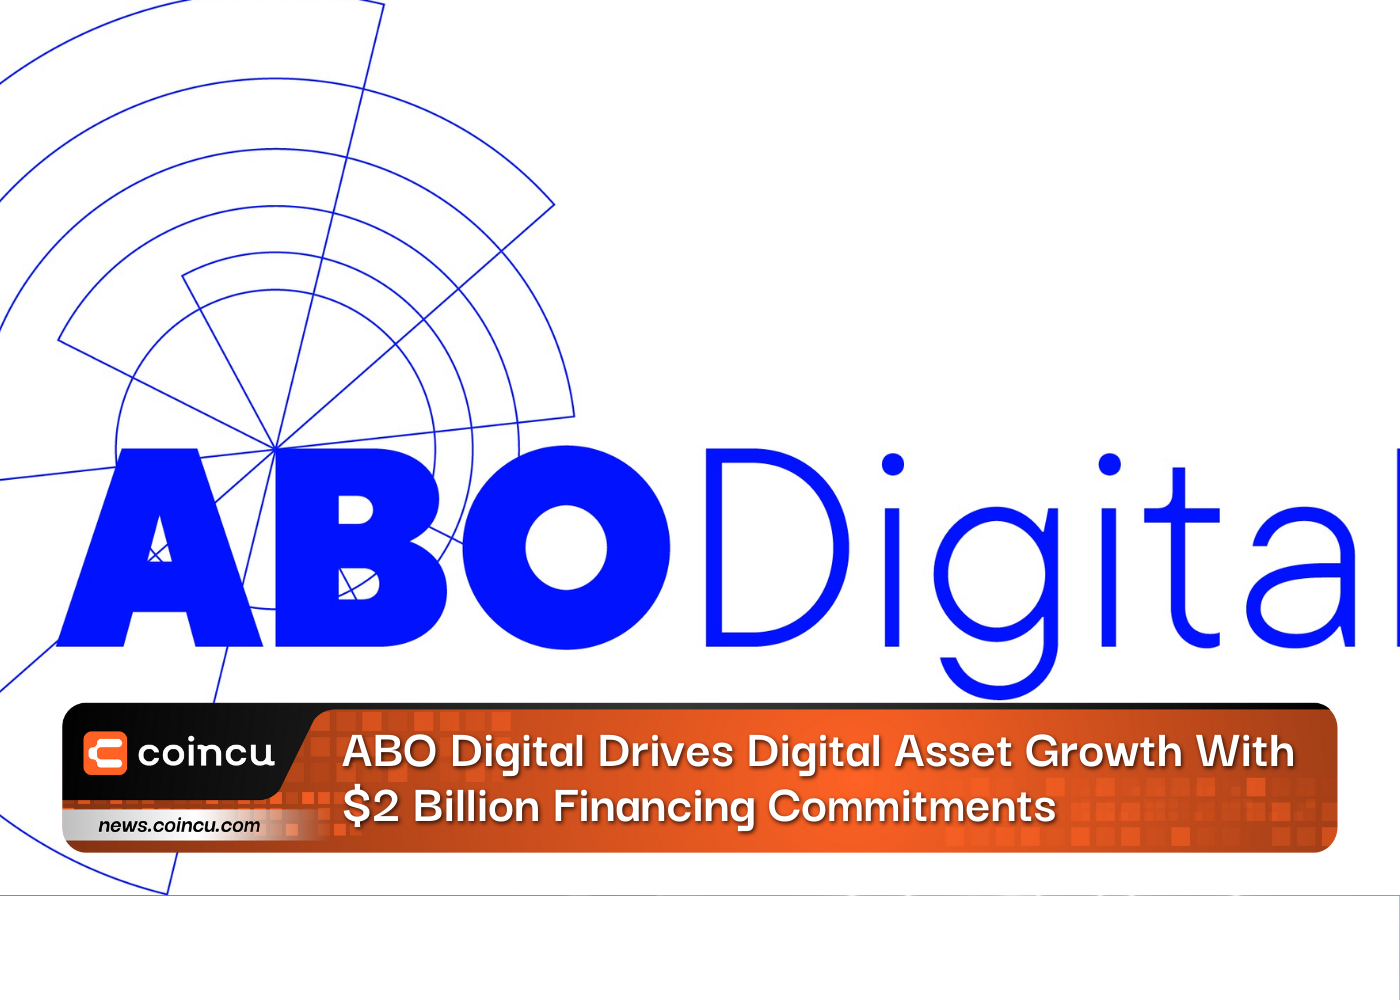 ABO Digital Drives Digital Asset Growth With $2 Billion Financing Commitments